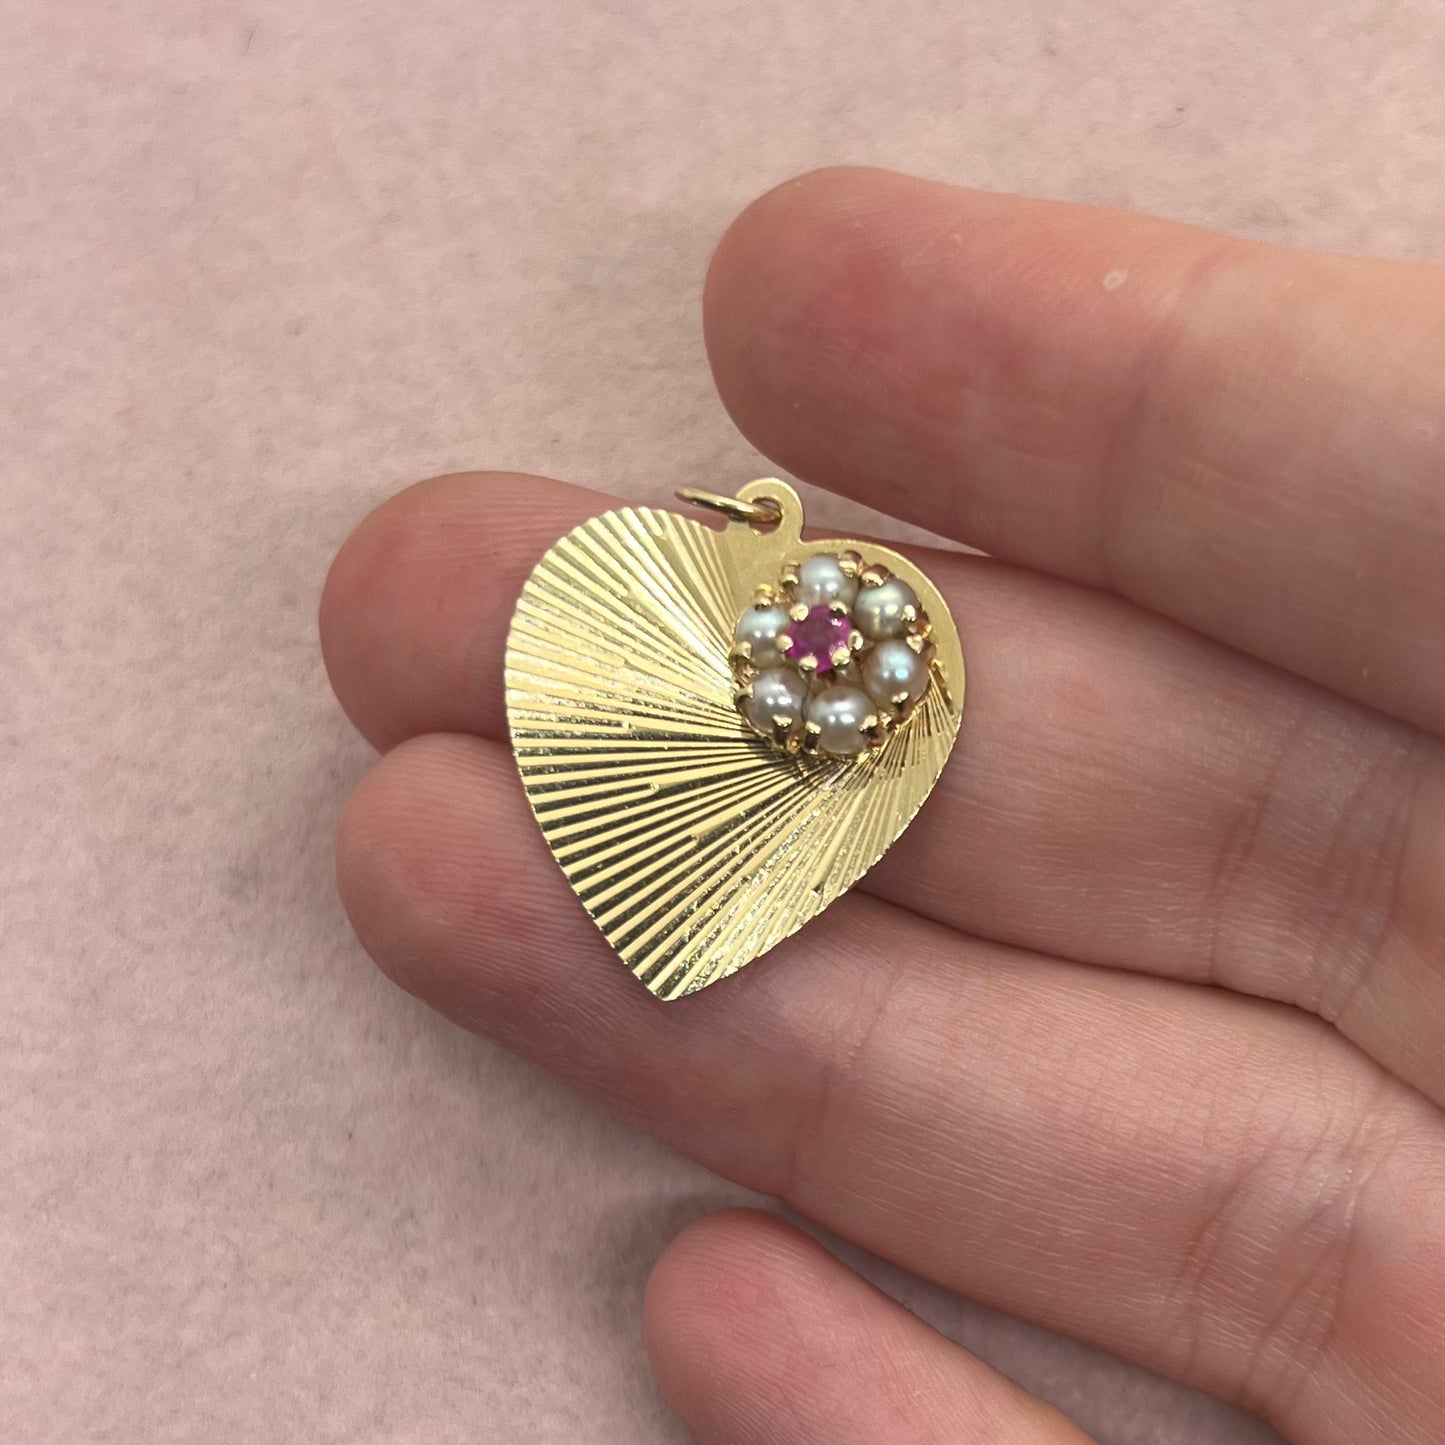 Engine-Turned Heart Pendant with Pearls and Topaz